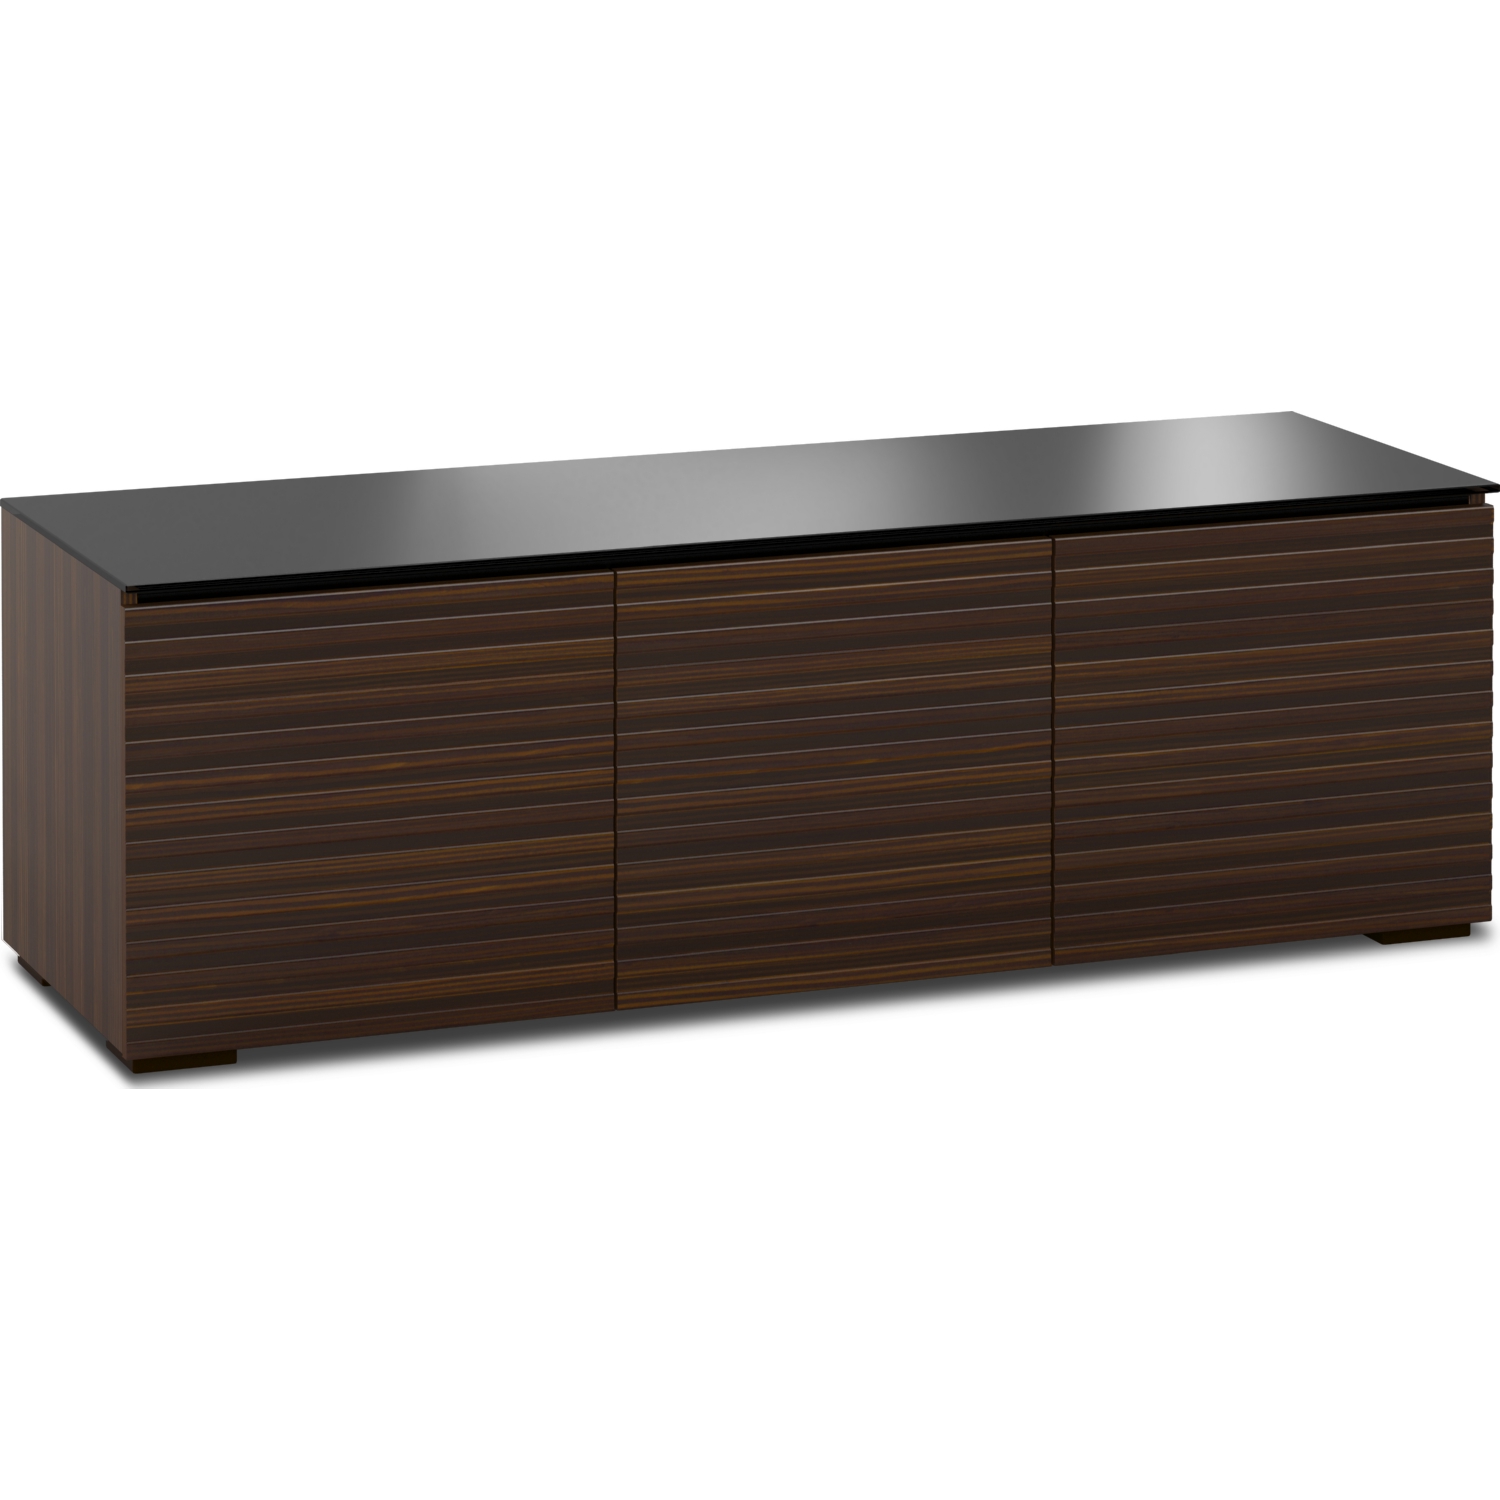 Zurich 237 64" TV Stand Cabinet w/ Linear Texture in Opium Brown w/ Black Glass Top & Sides